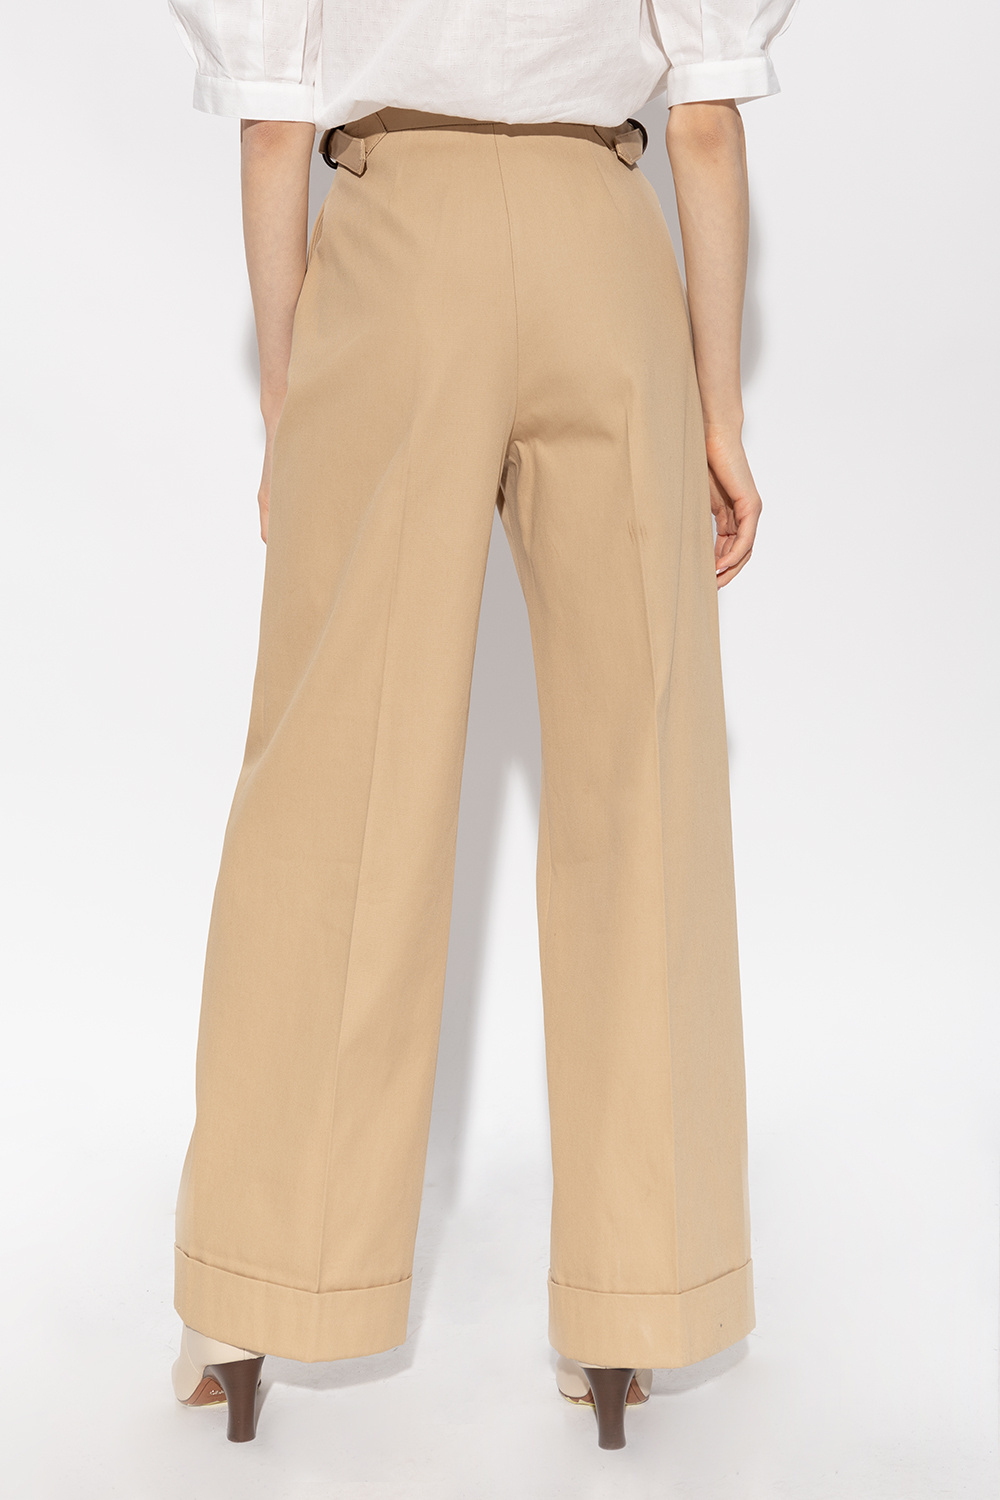 See By Chloé Wide-legged trousers